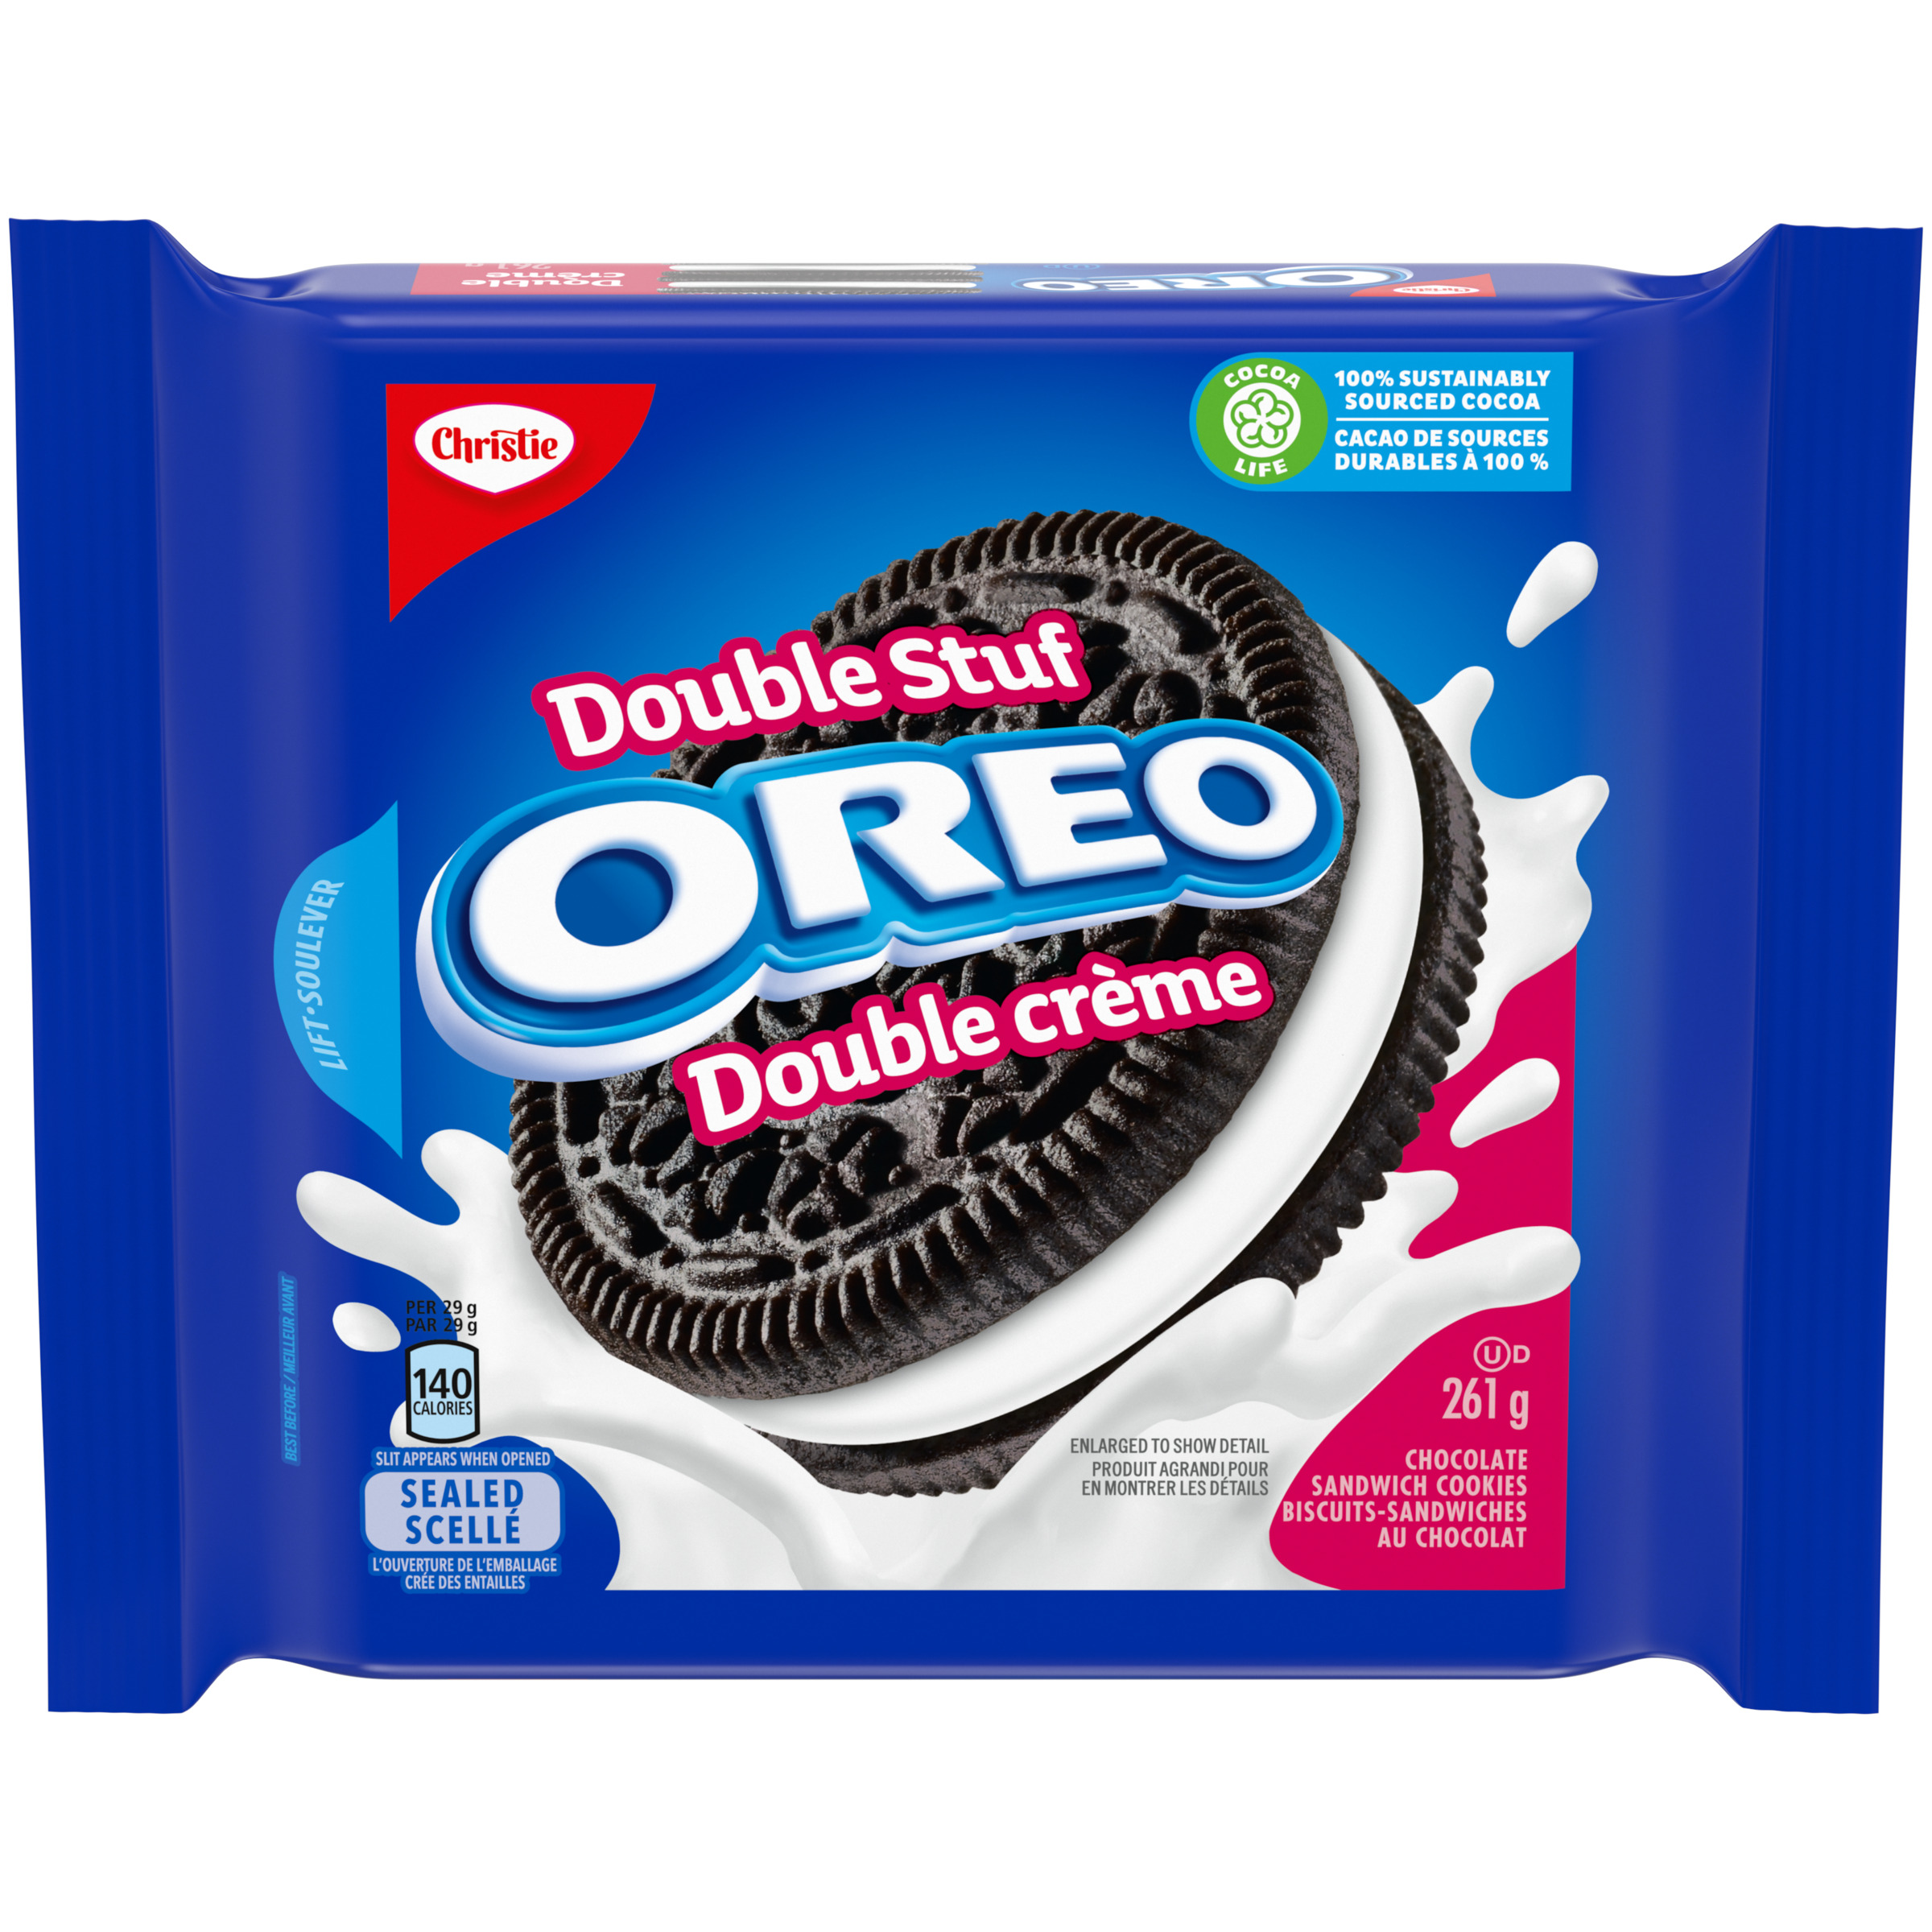 Biscuits-sandwiches OREO Double crème, 1 emballage refermable de 261 g